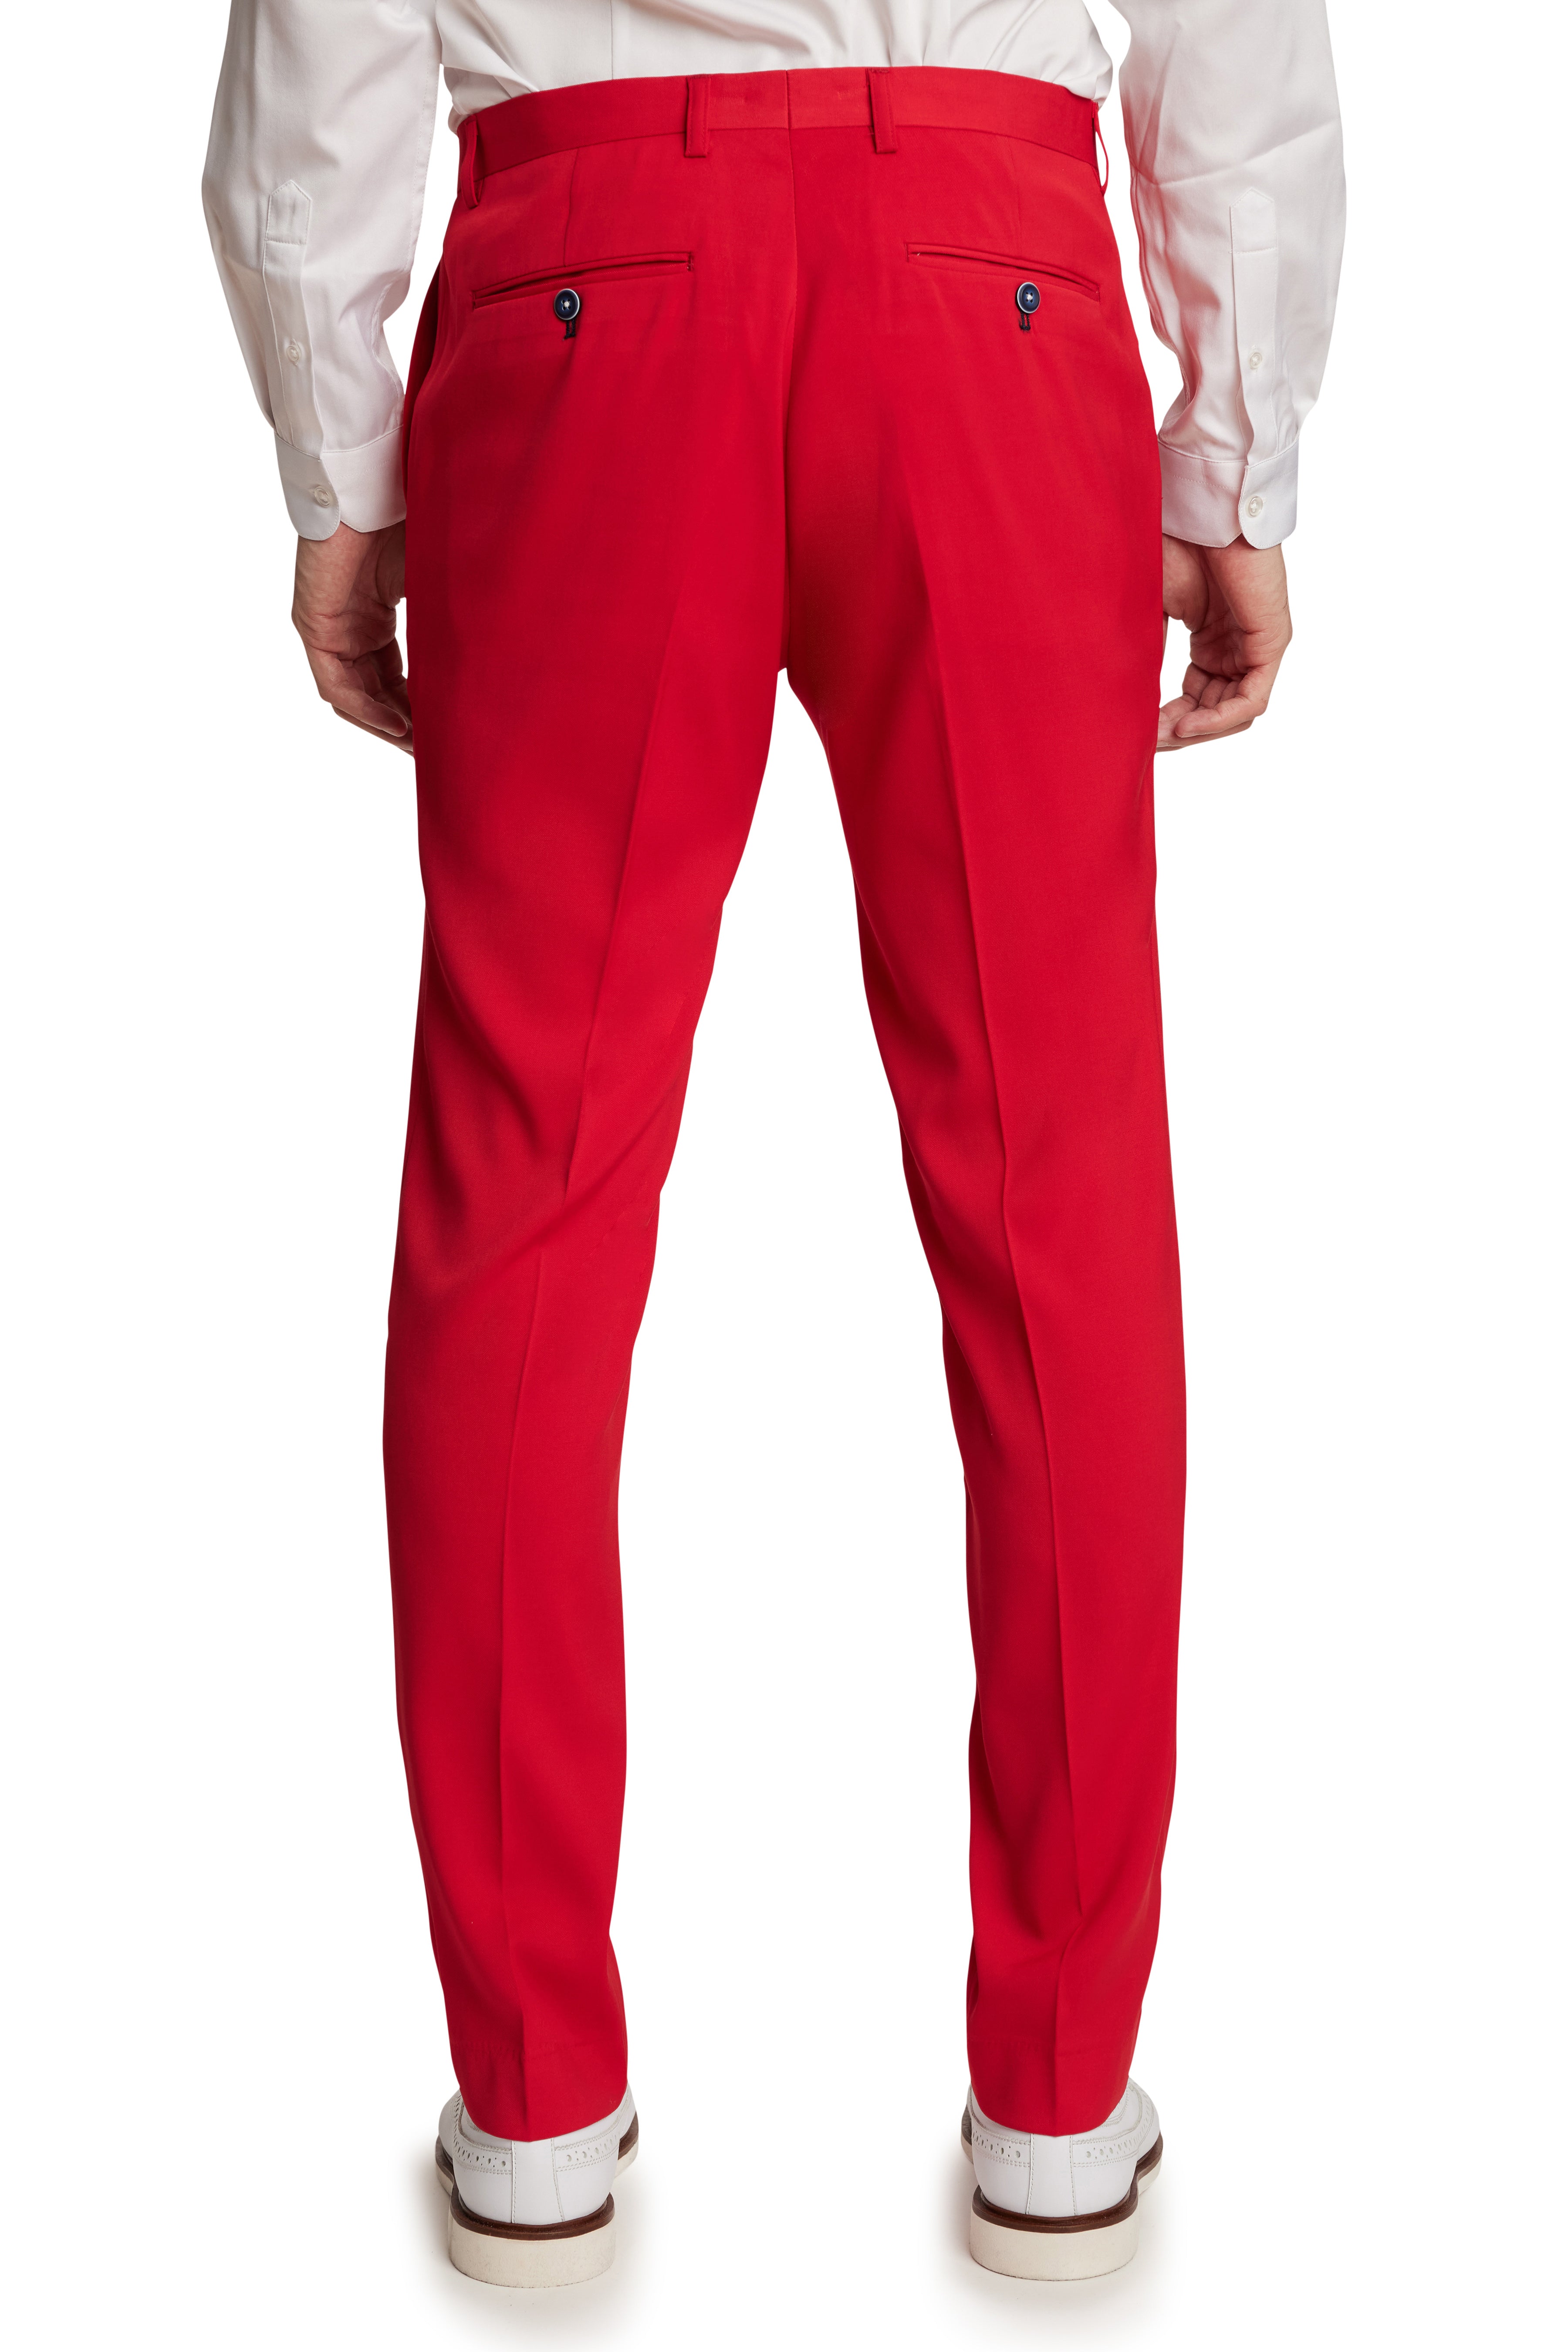 Downing Pants - slim - Hot Rod Red